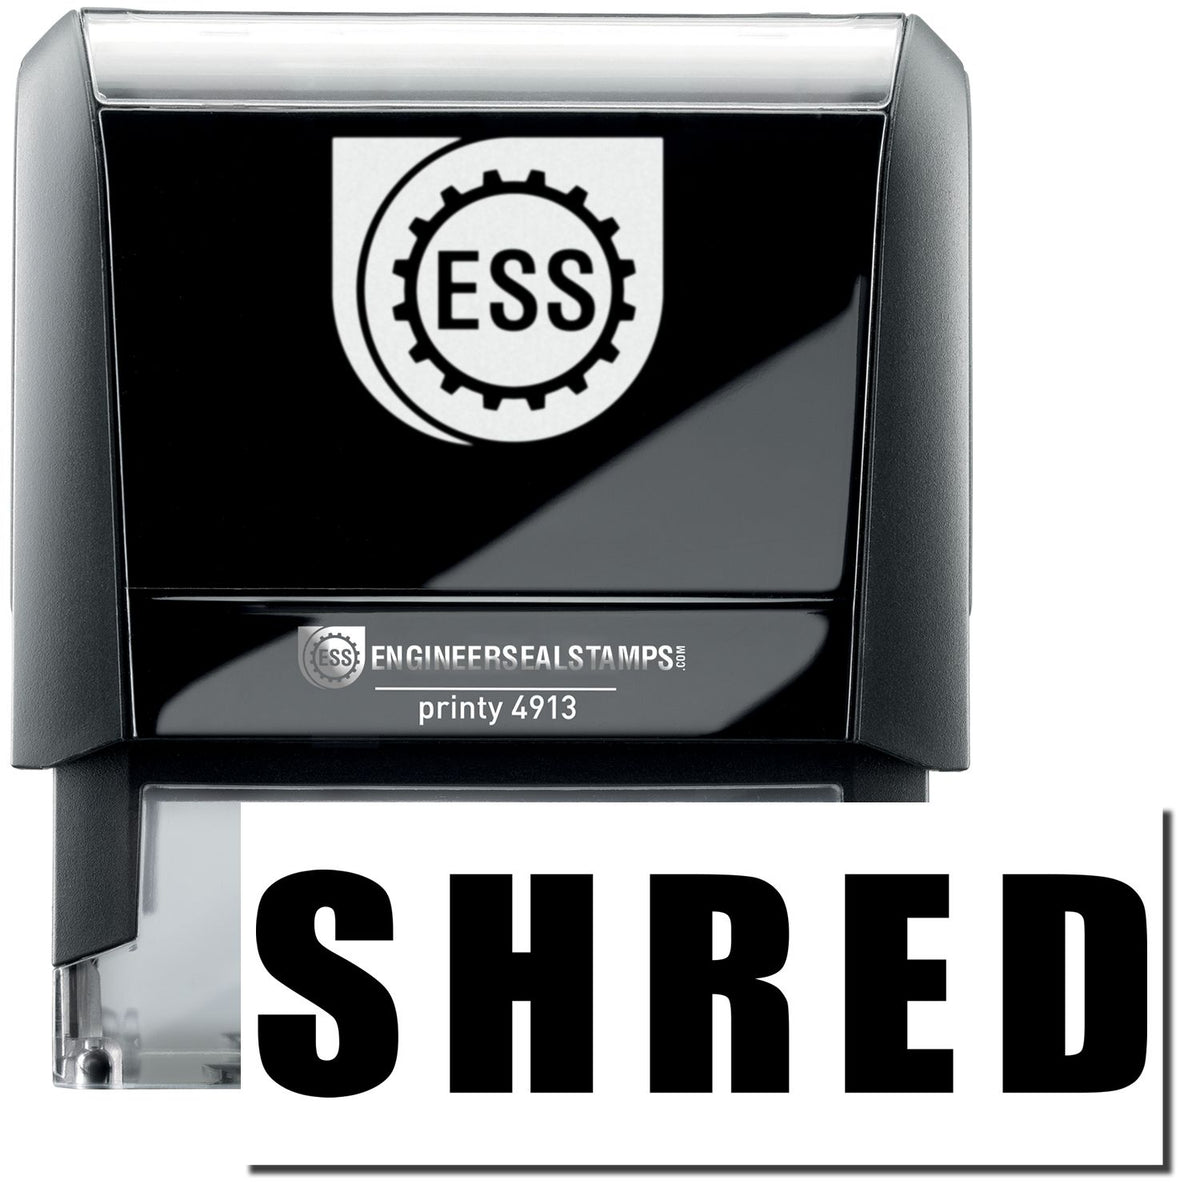 A self-inking stamp with a stamped image showing how the text &quot;SHRED&quot; in a large bold font is displayed by it after stamping.